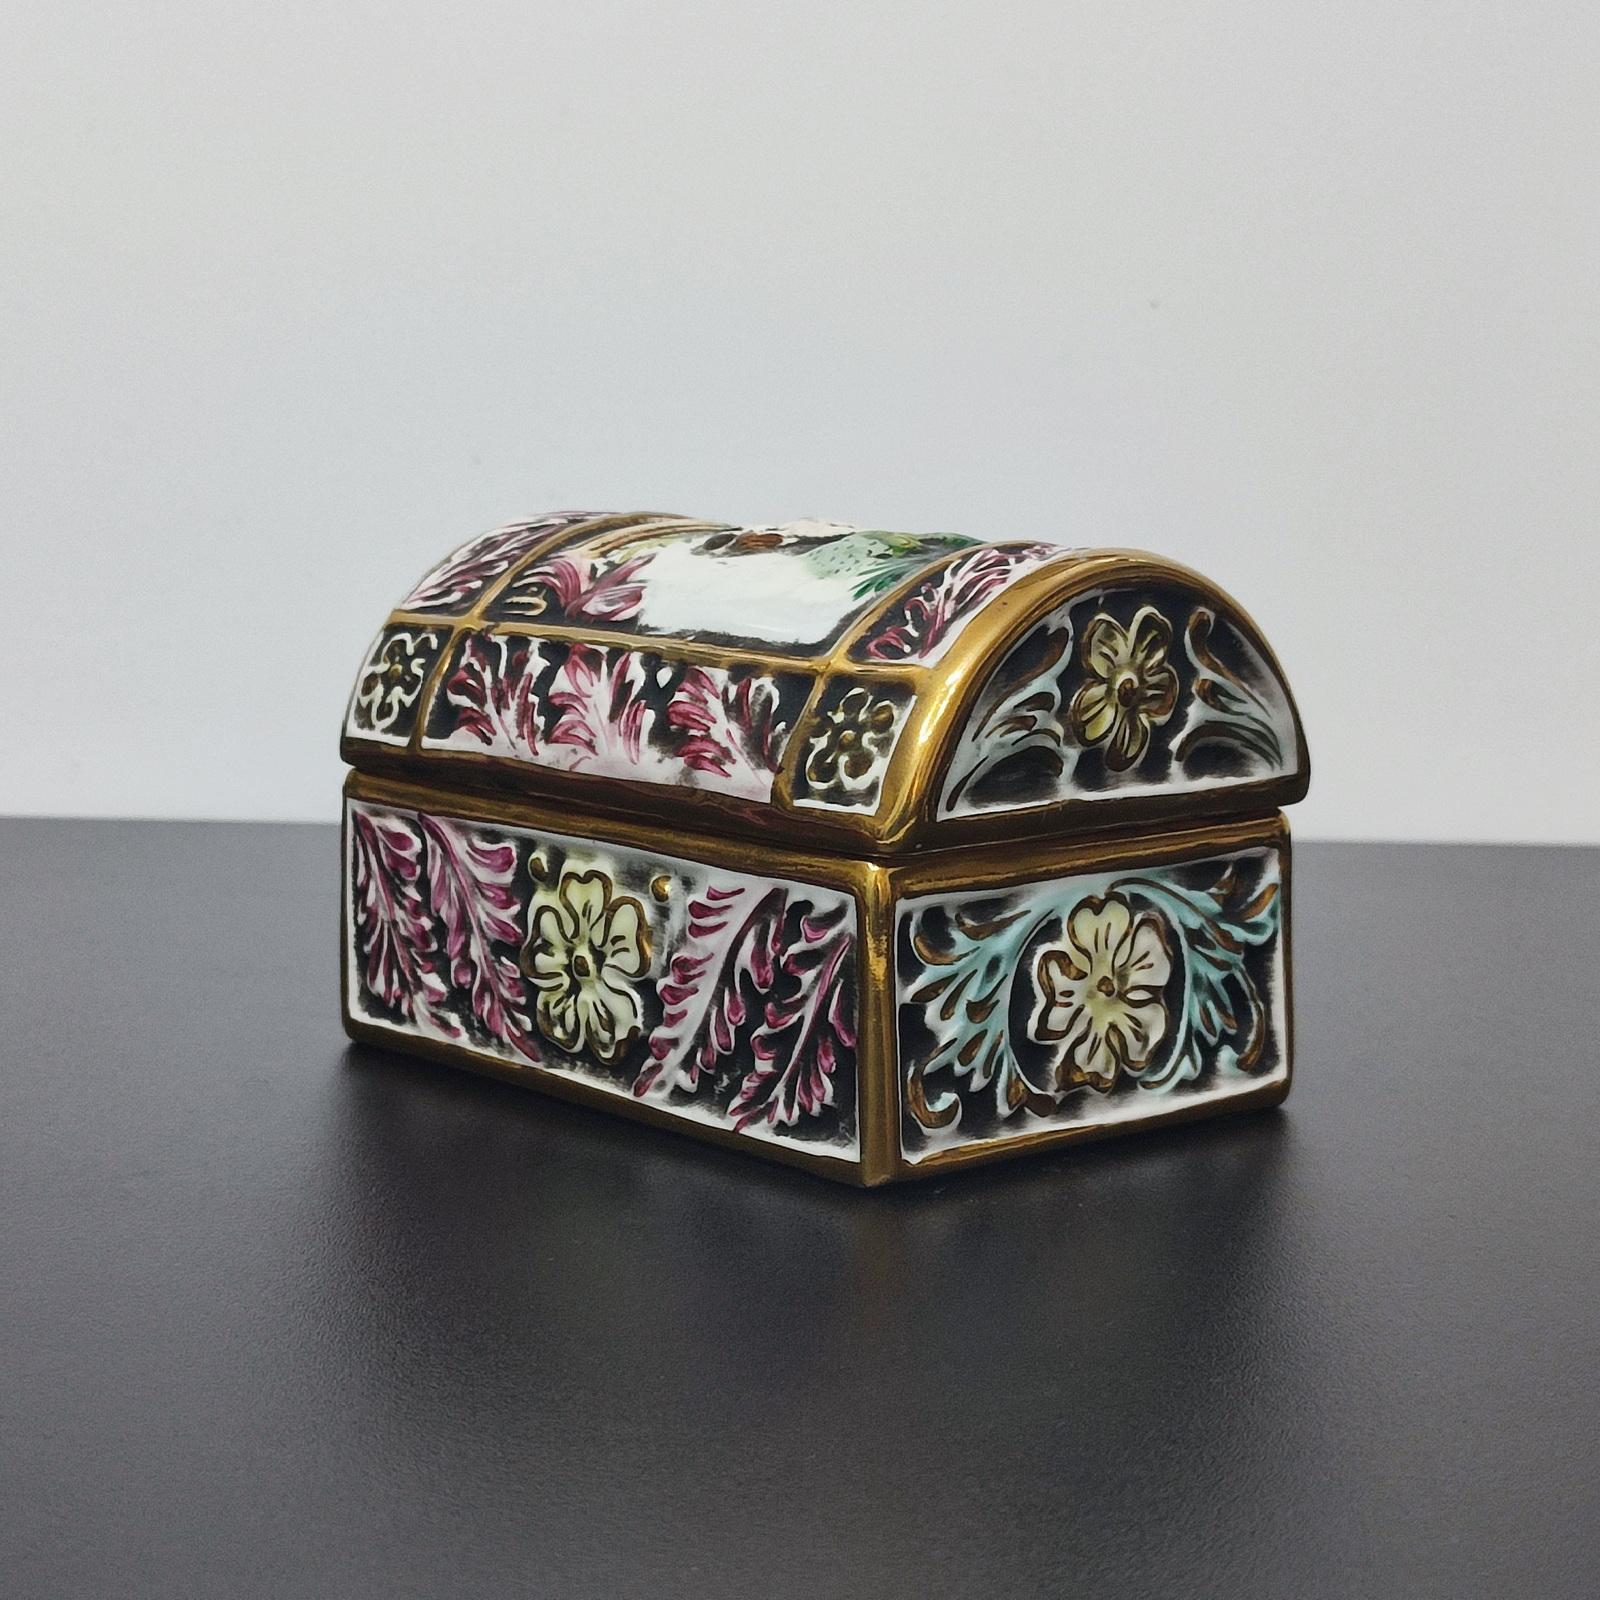 Capodimonte Porcelain Chest, Jewelry Box, Italy Mid 20th Century - FREE SHIPPING In Good Condition For Sale In Bochum, NRW